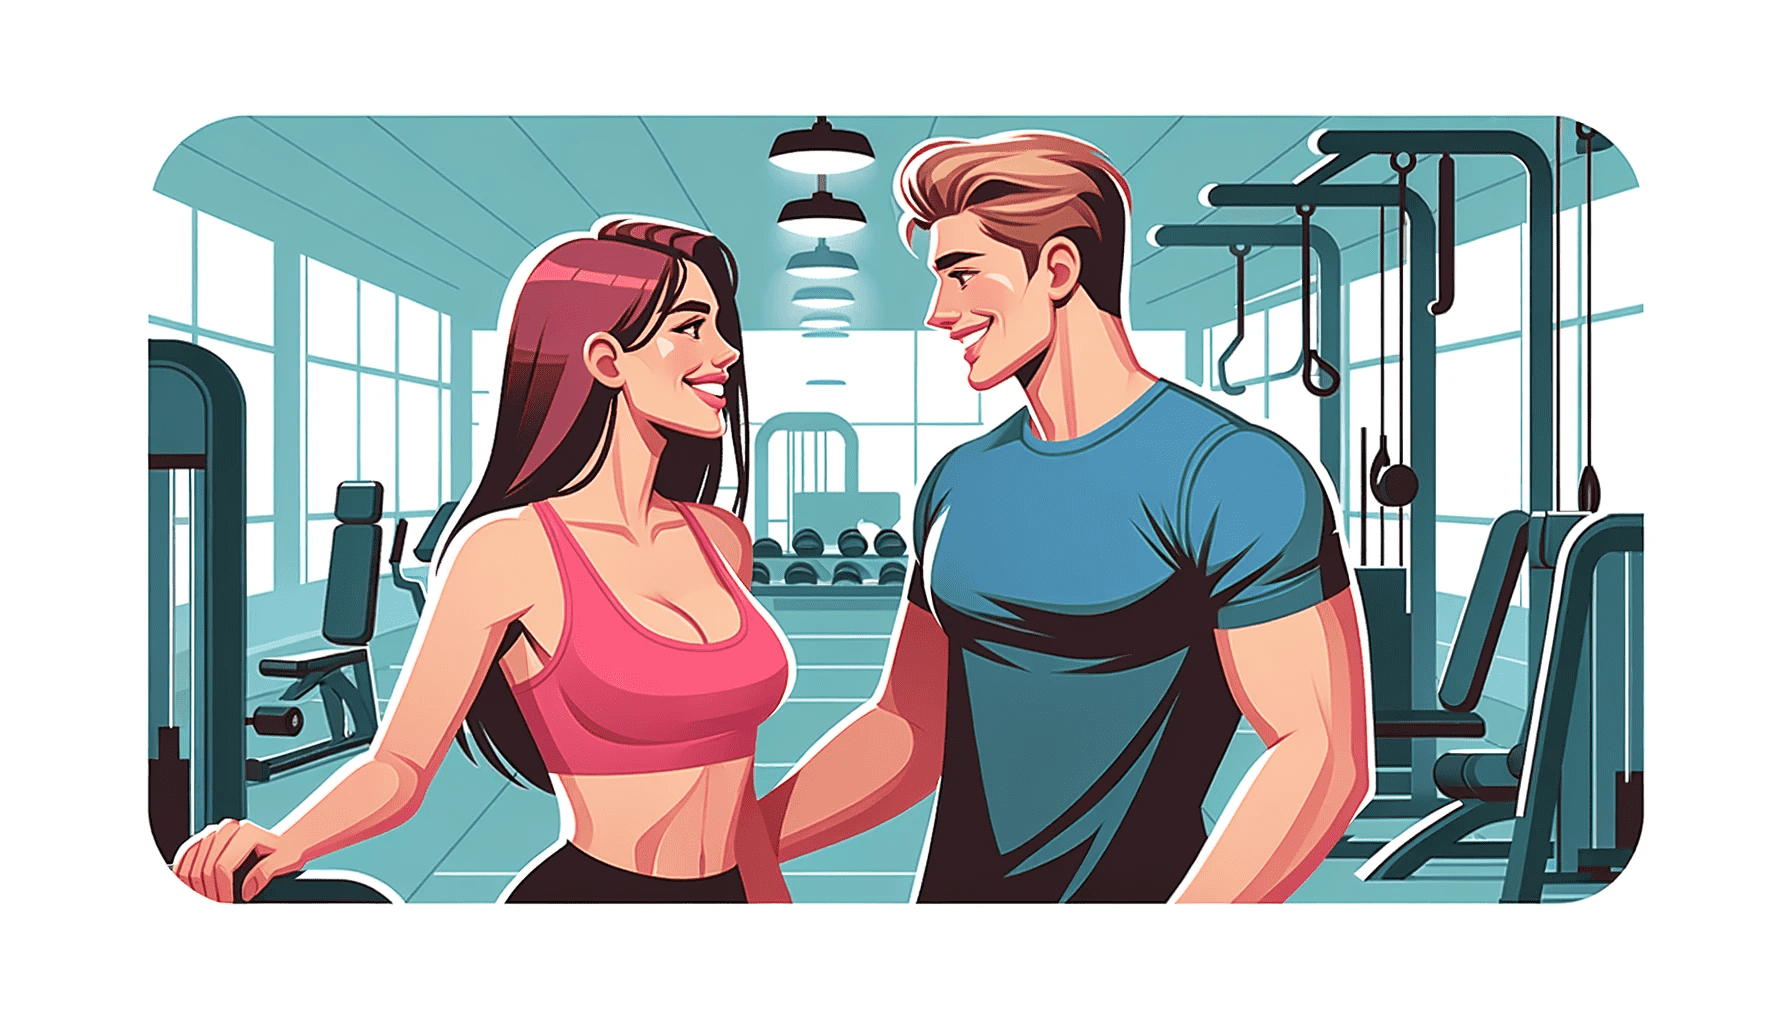 Body language of girl interested in a guy at the gym